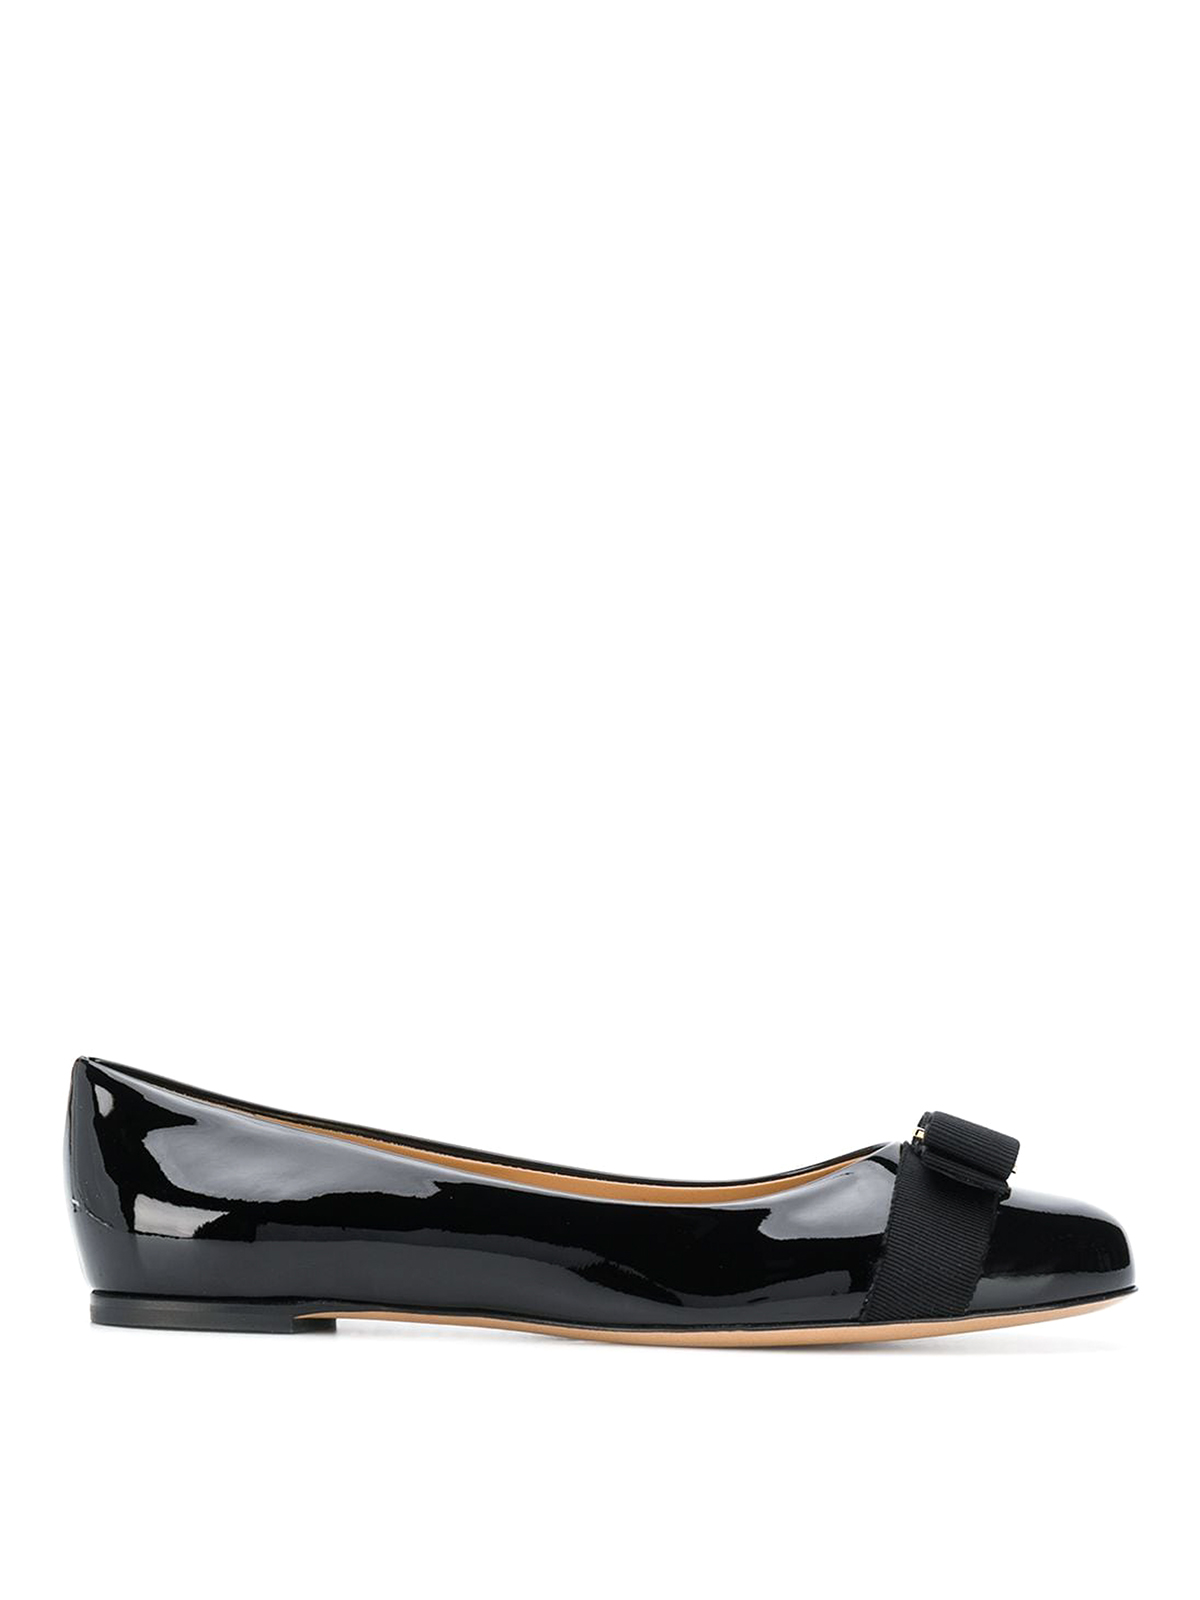 Ferragamo Patent Leather Flats With Bow Detail In Black